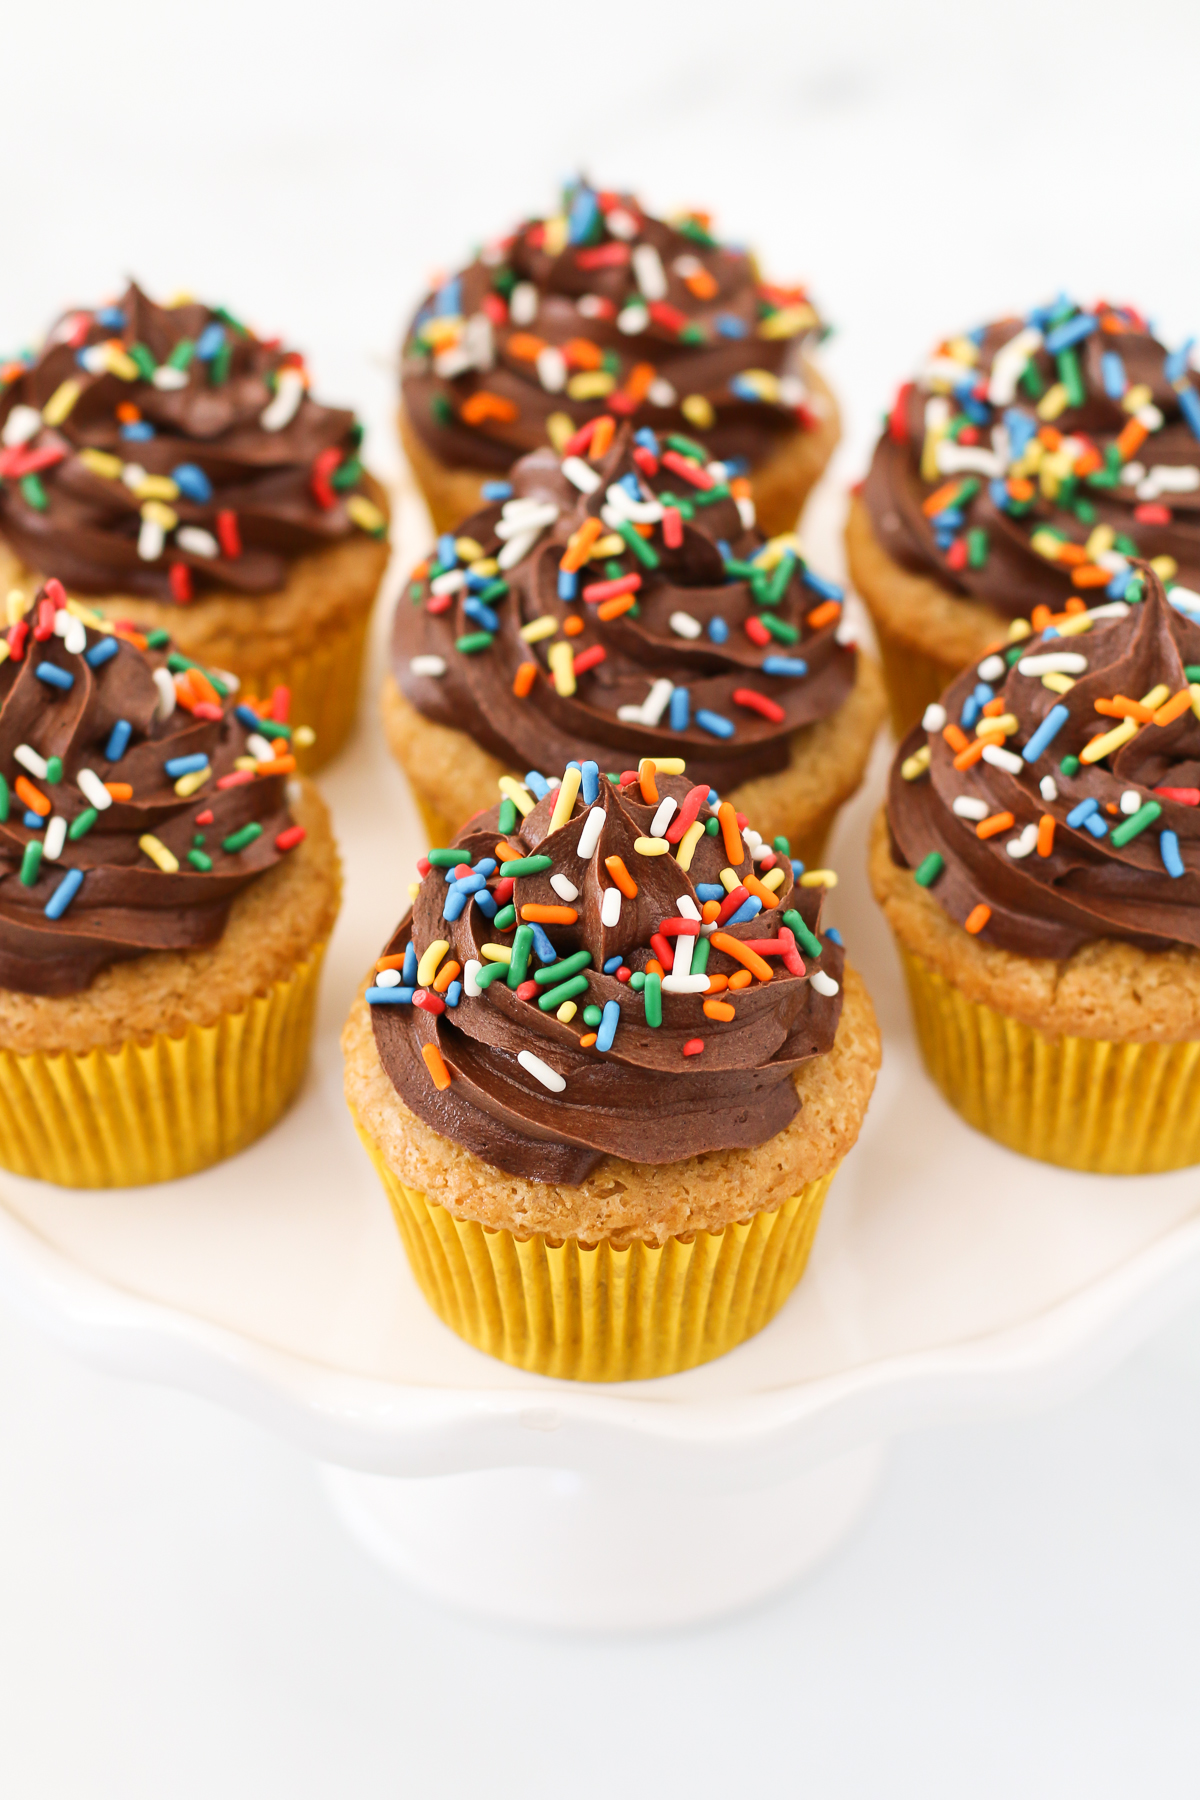 Gluten Free Vegan Vanilla Cupcakes with Chocolate Frosting. The classic flavors of a perfect vanilla cupcake, topped with a rich and creamy chocolate frosting. 